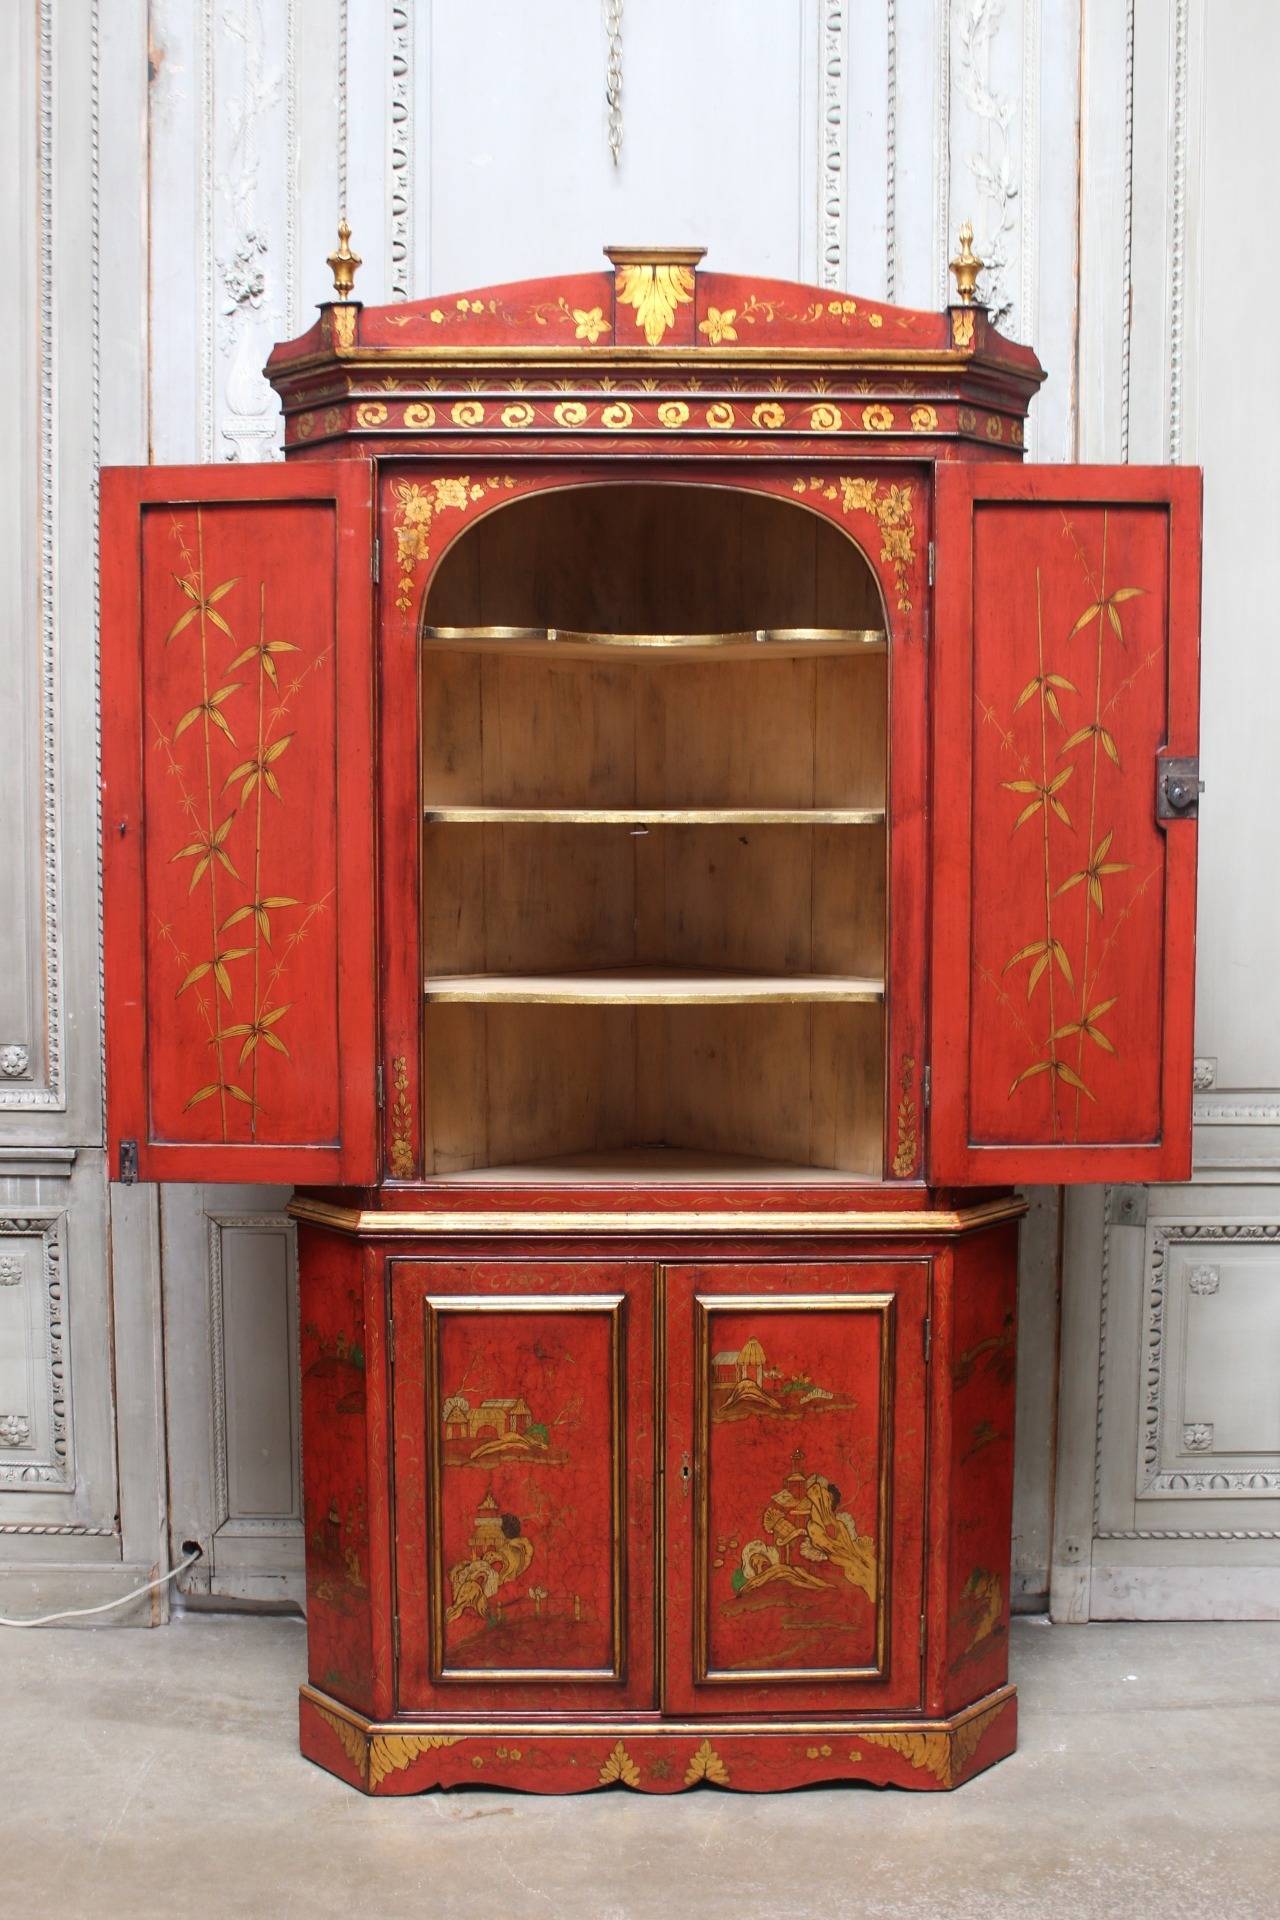 An English Georgian style red japanned and parcel-gilt corner cupboard. This pine corner cabinet is a 19th century piece with mid-20th century painted decoration.